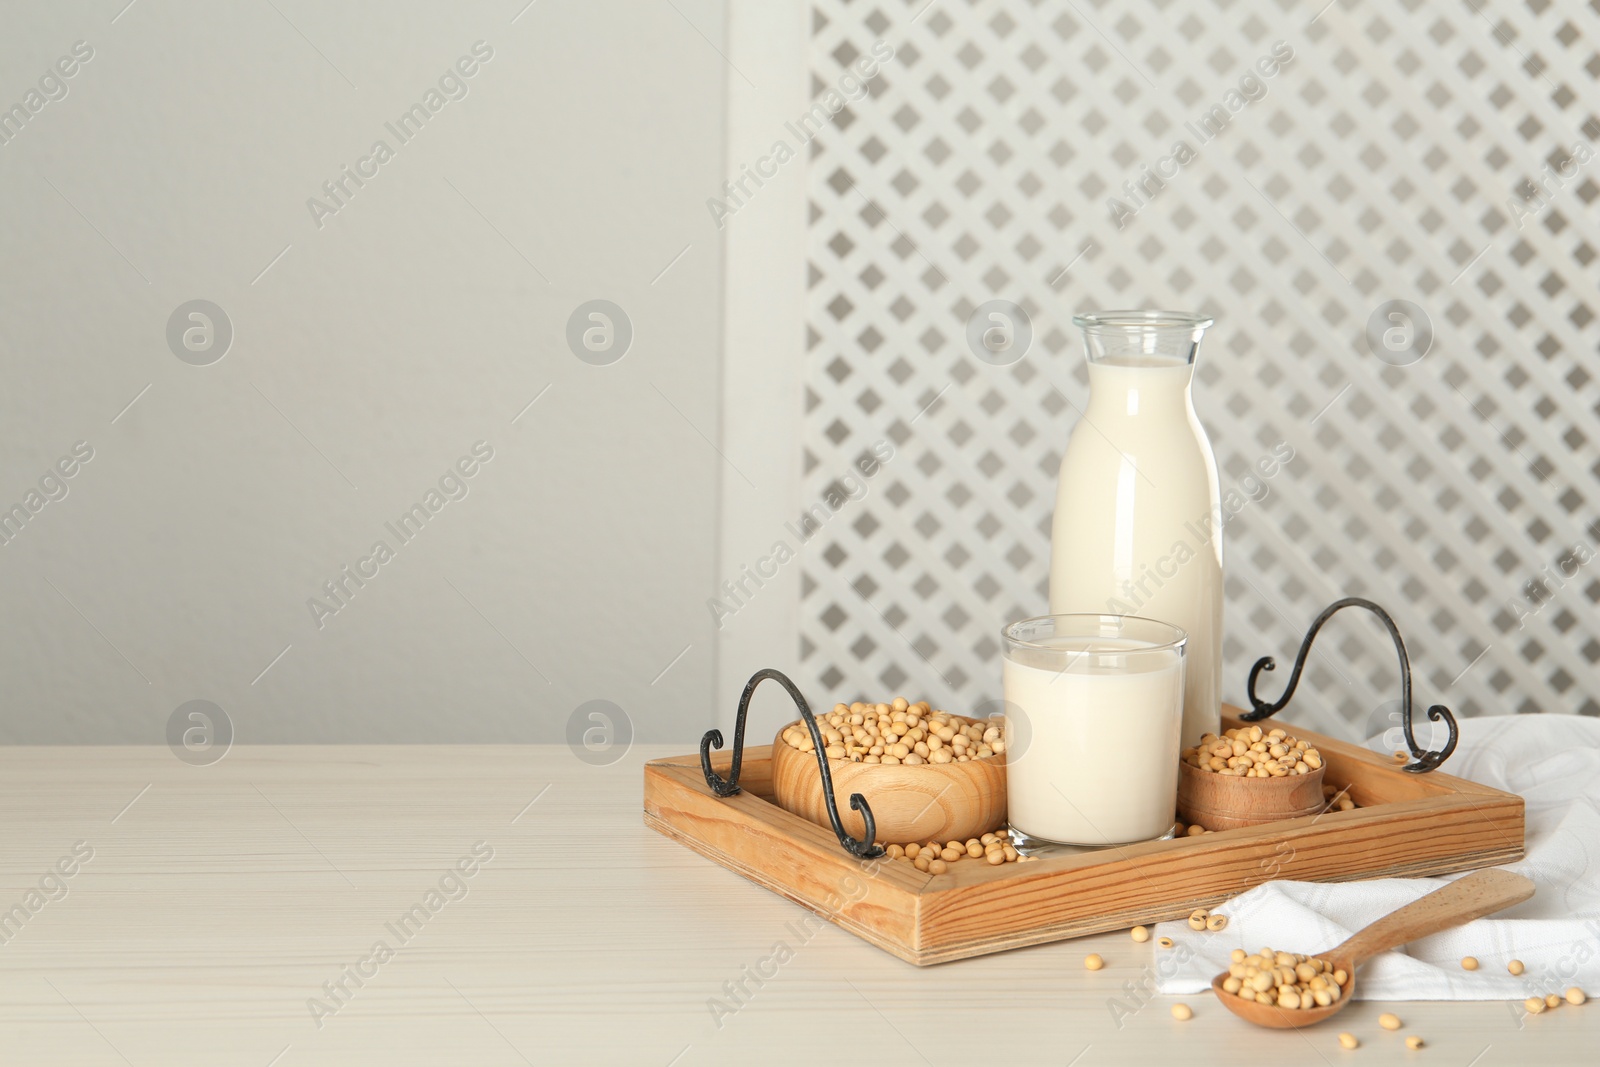 Photo of Soy milk and beans on wooden table, space for text